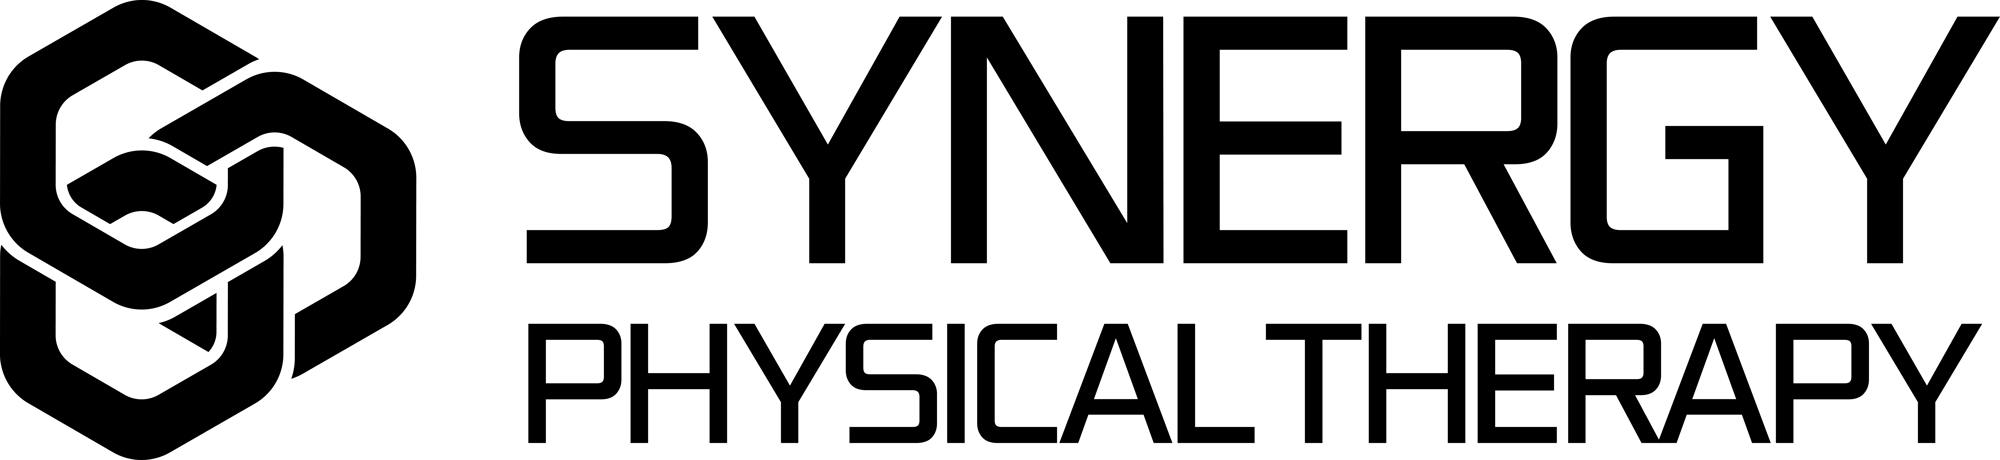 Synergy Physical Therapy - Bennett and Kelsey Rader - Oklahoma City, OK - logo